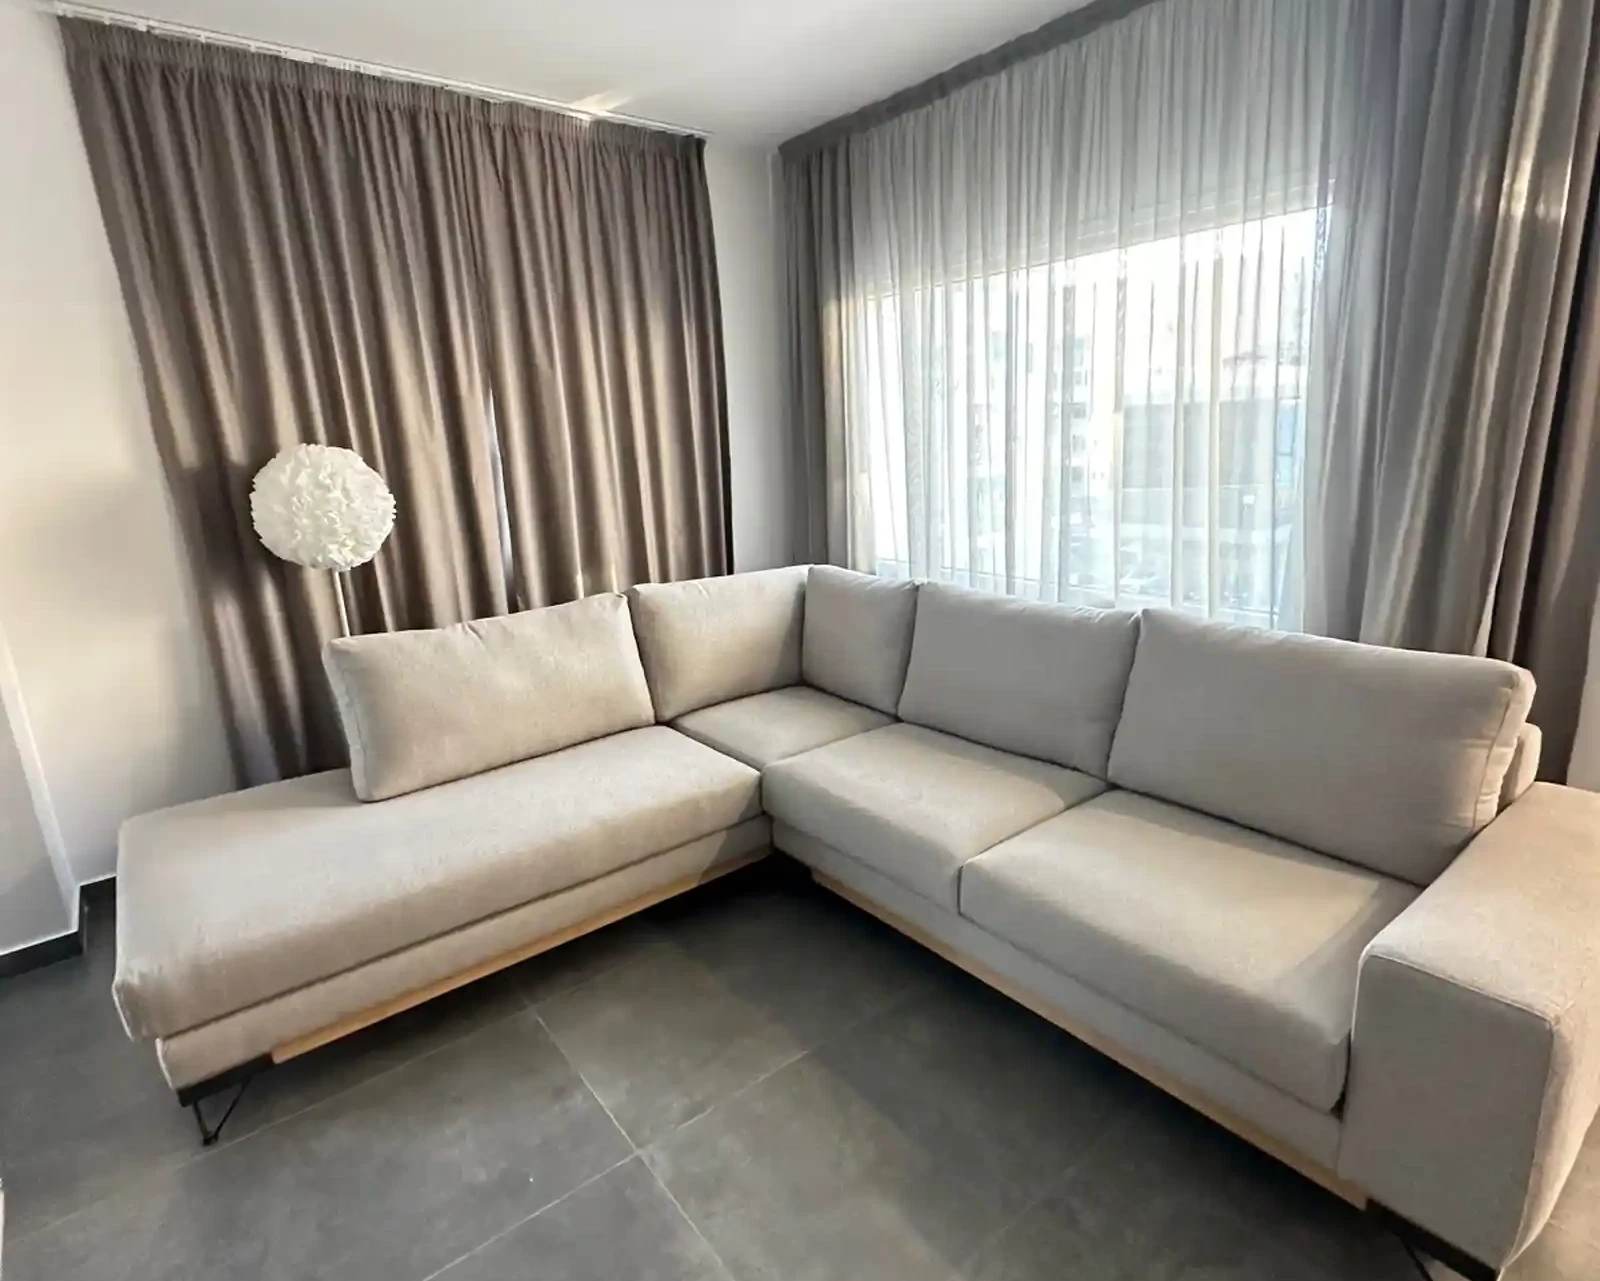 2-bedroom apartment to rent €2.400, image 1